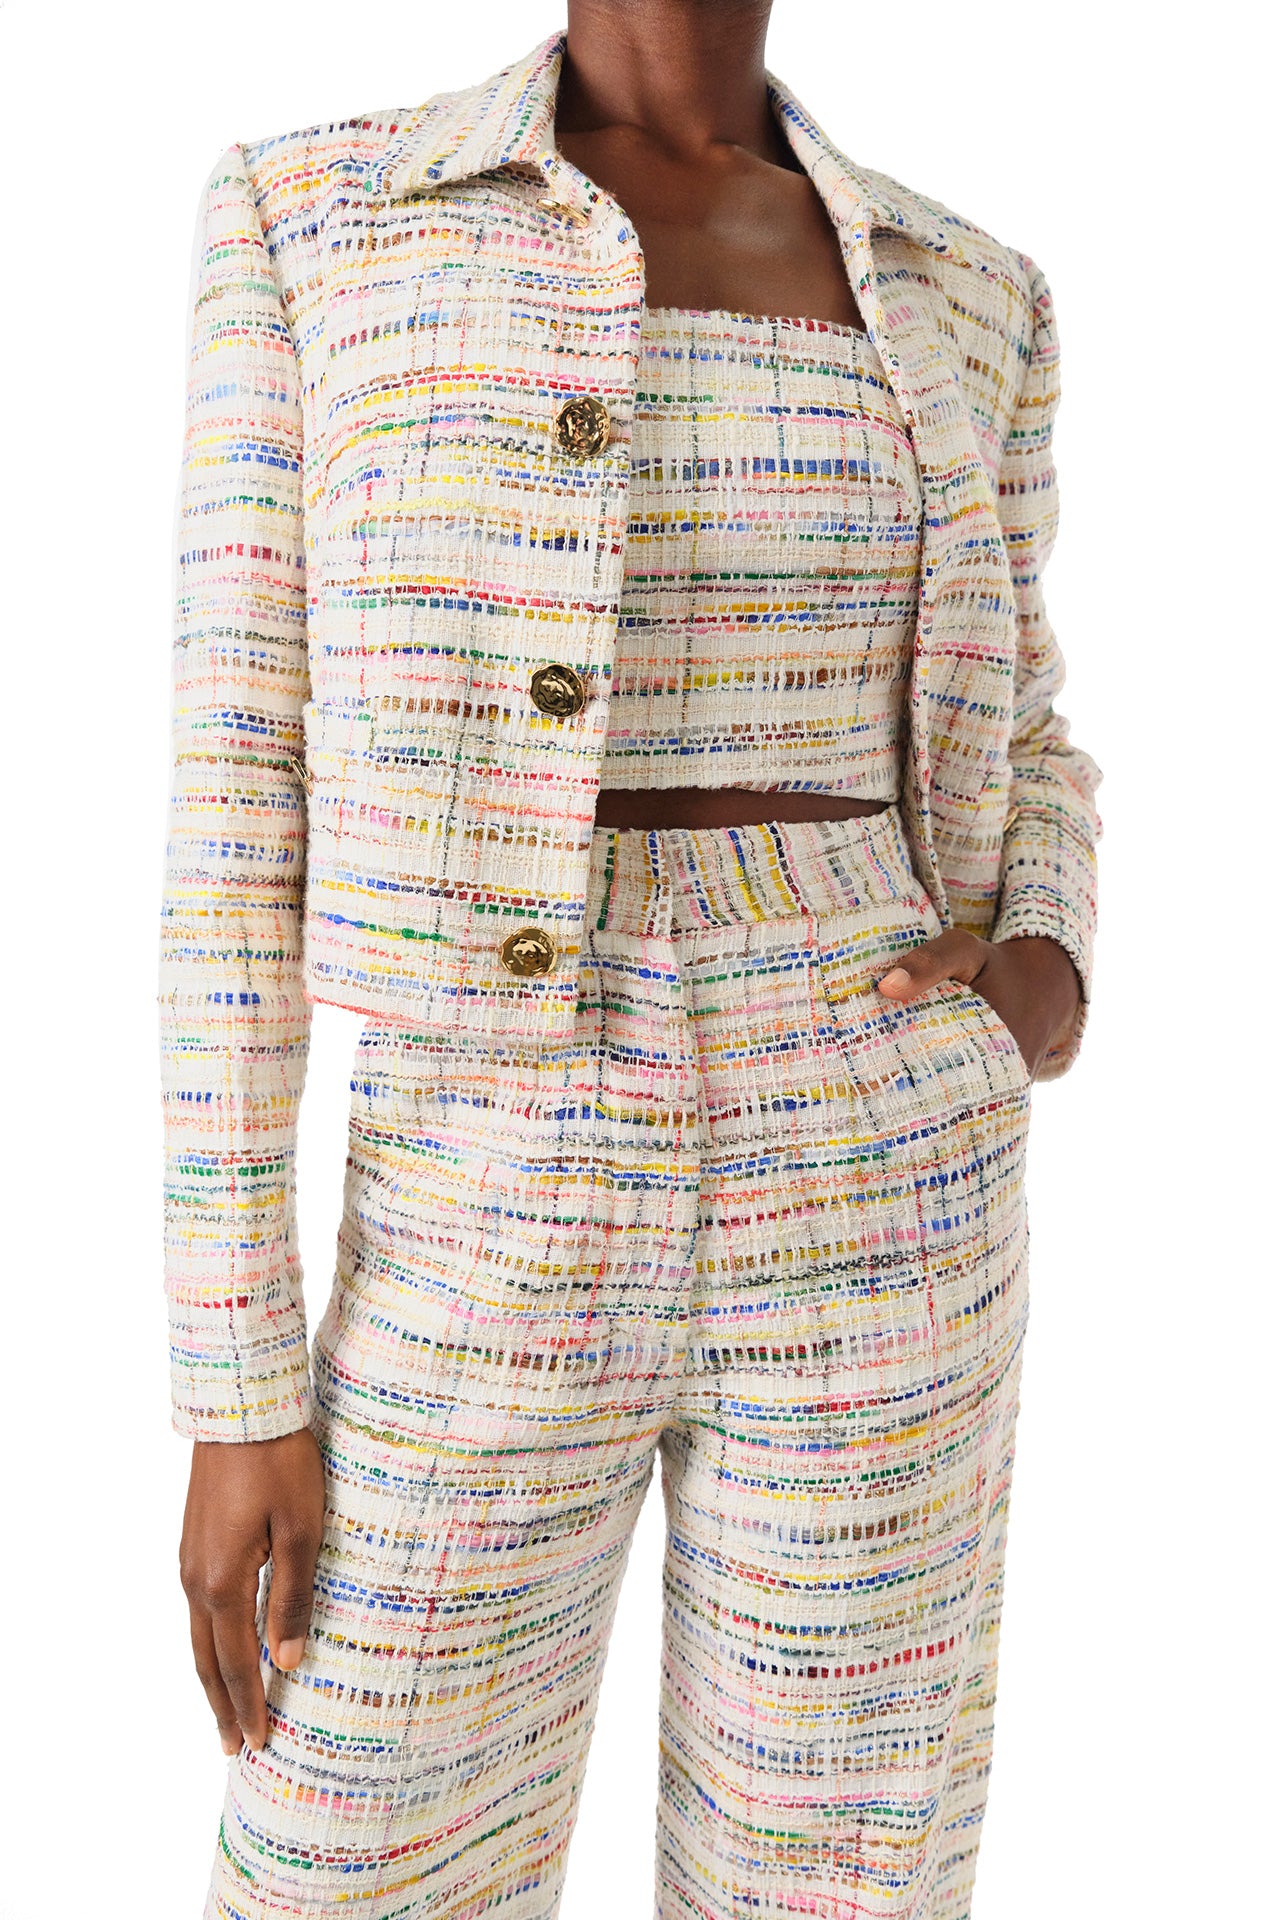 Monique Lhuillier Spring 2024 high waisted trouser with pockets in multi color tweed - detail.